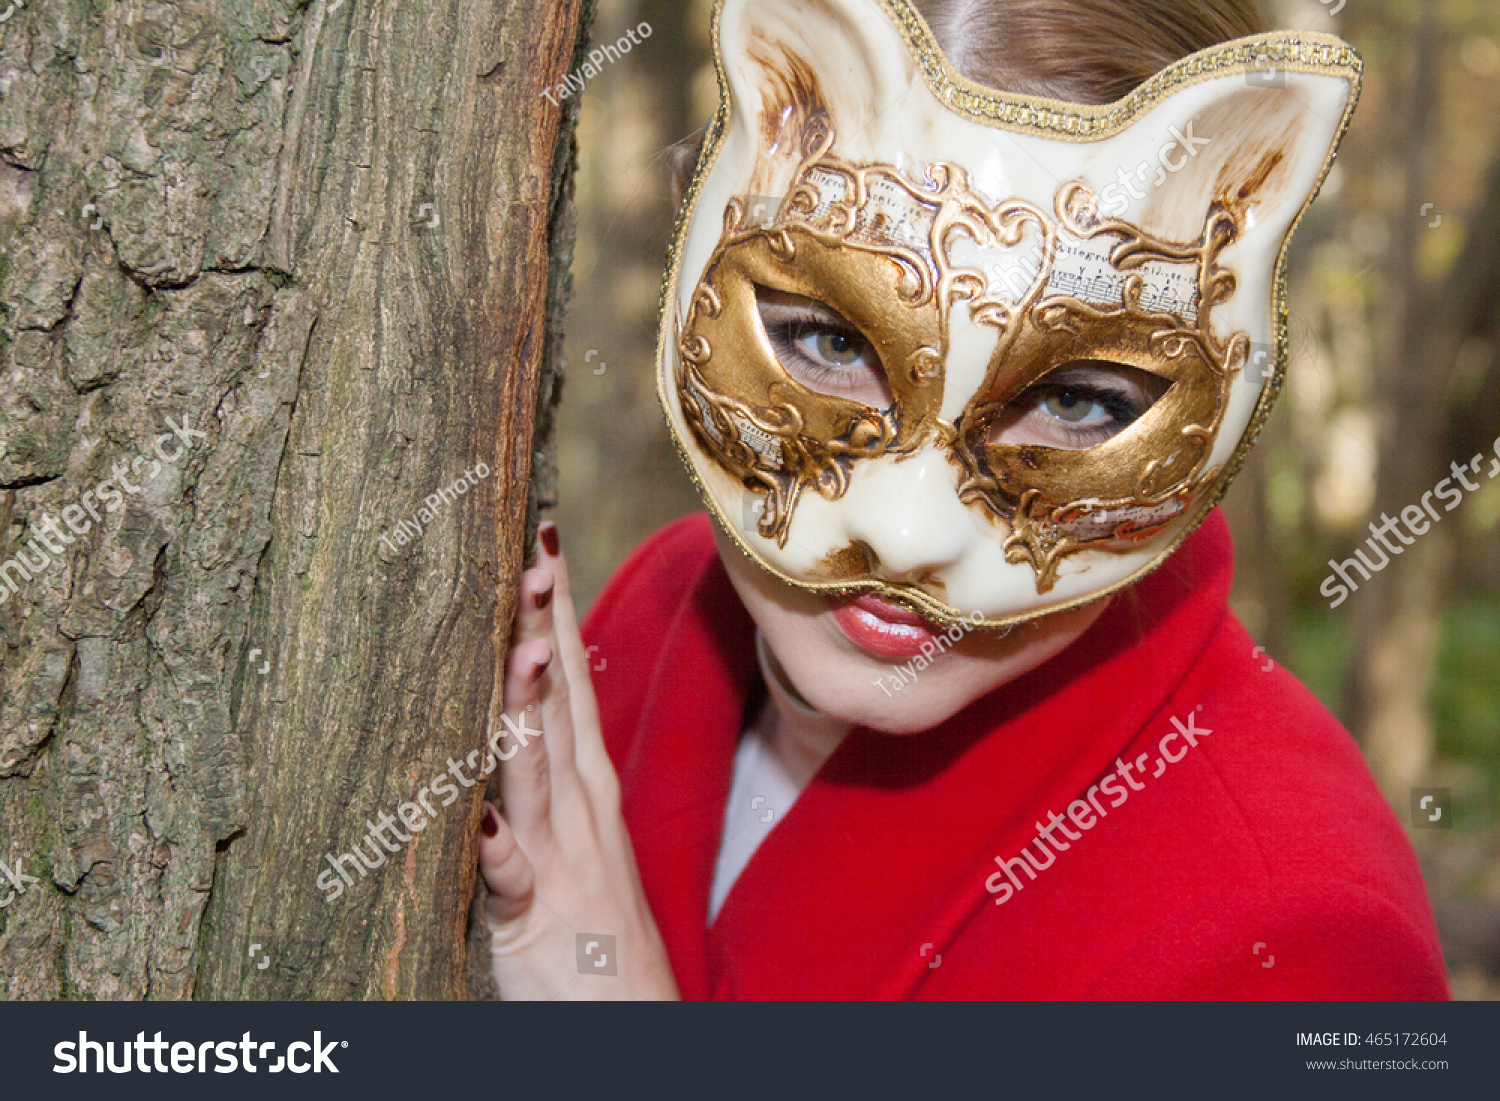 Young Woman Red Coat Cat Mask Stock Photo 465172604 - Shutterstock